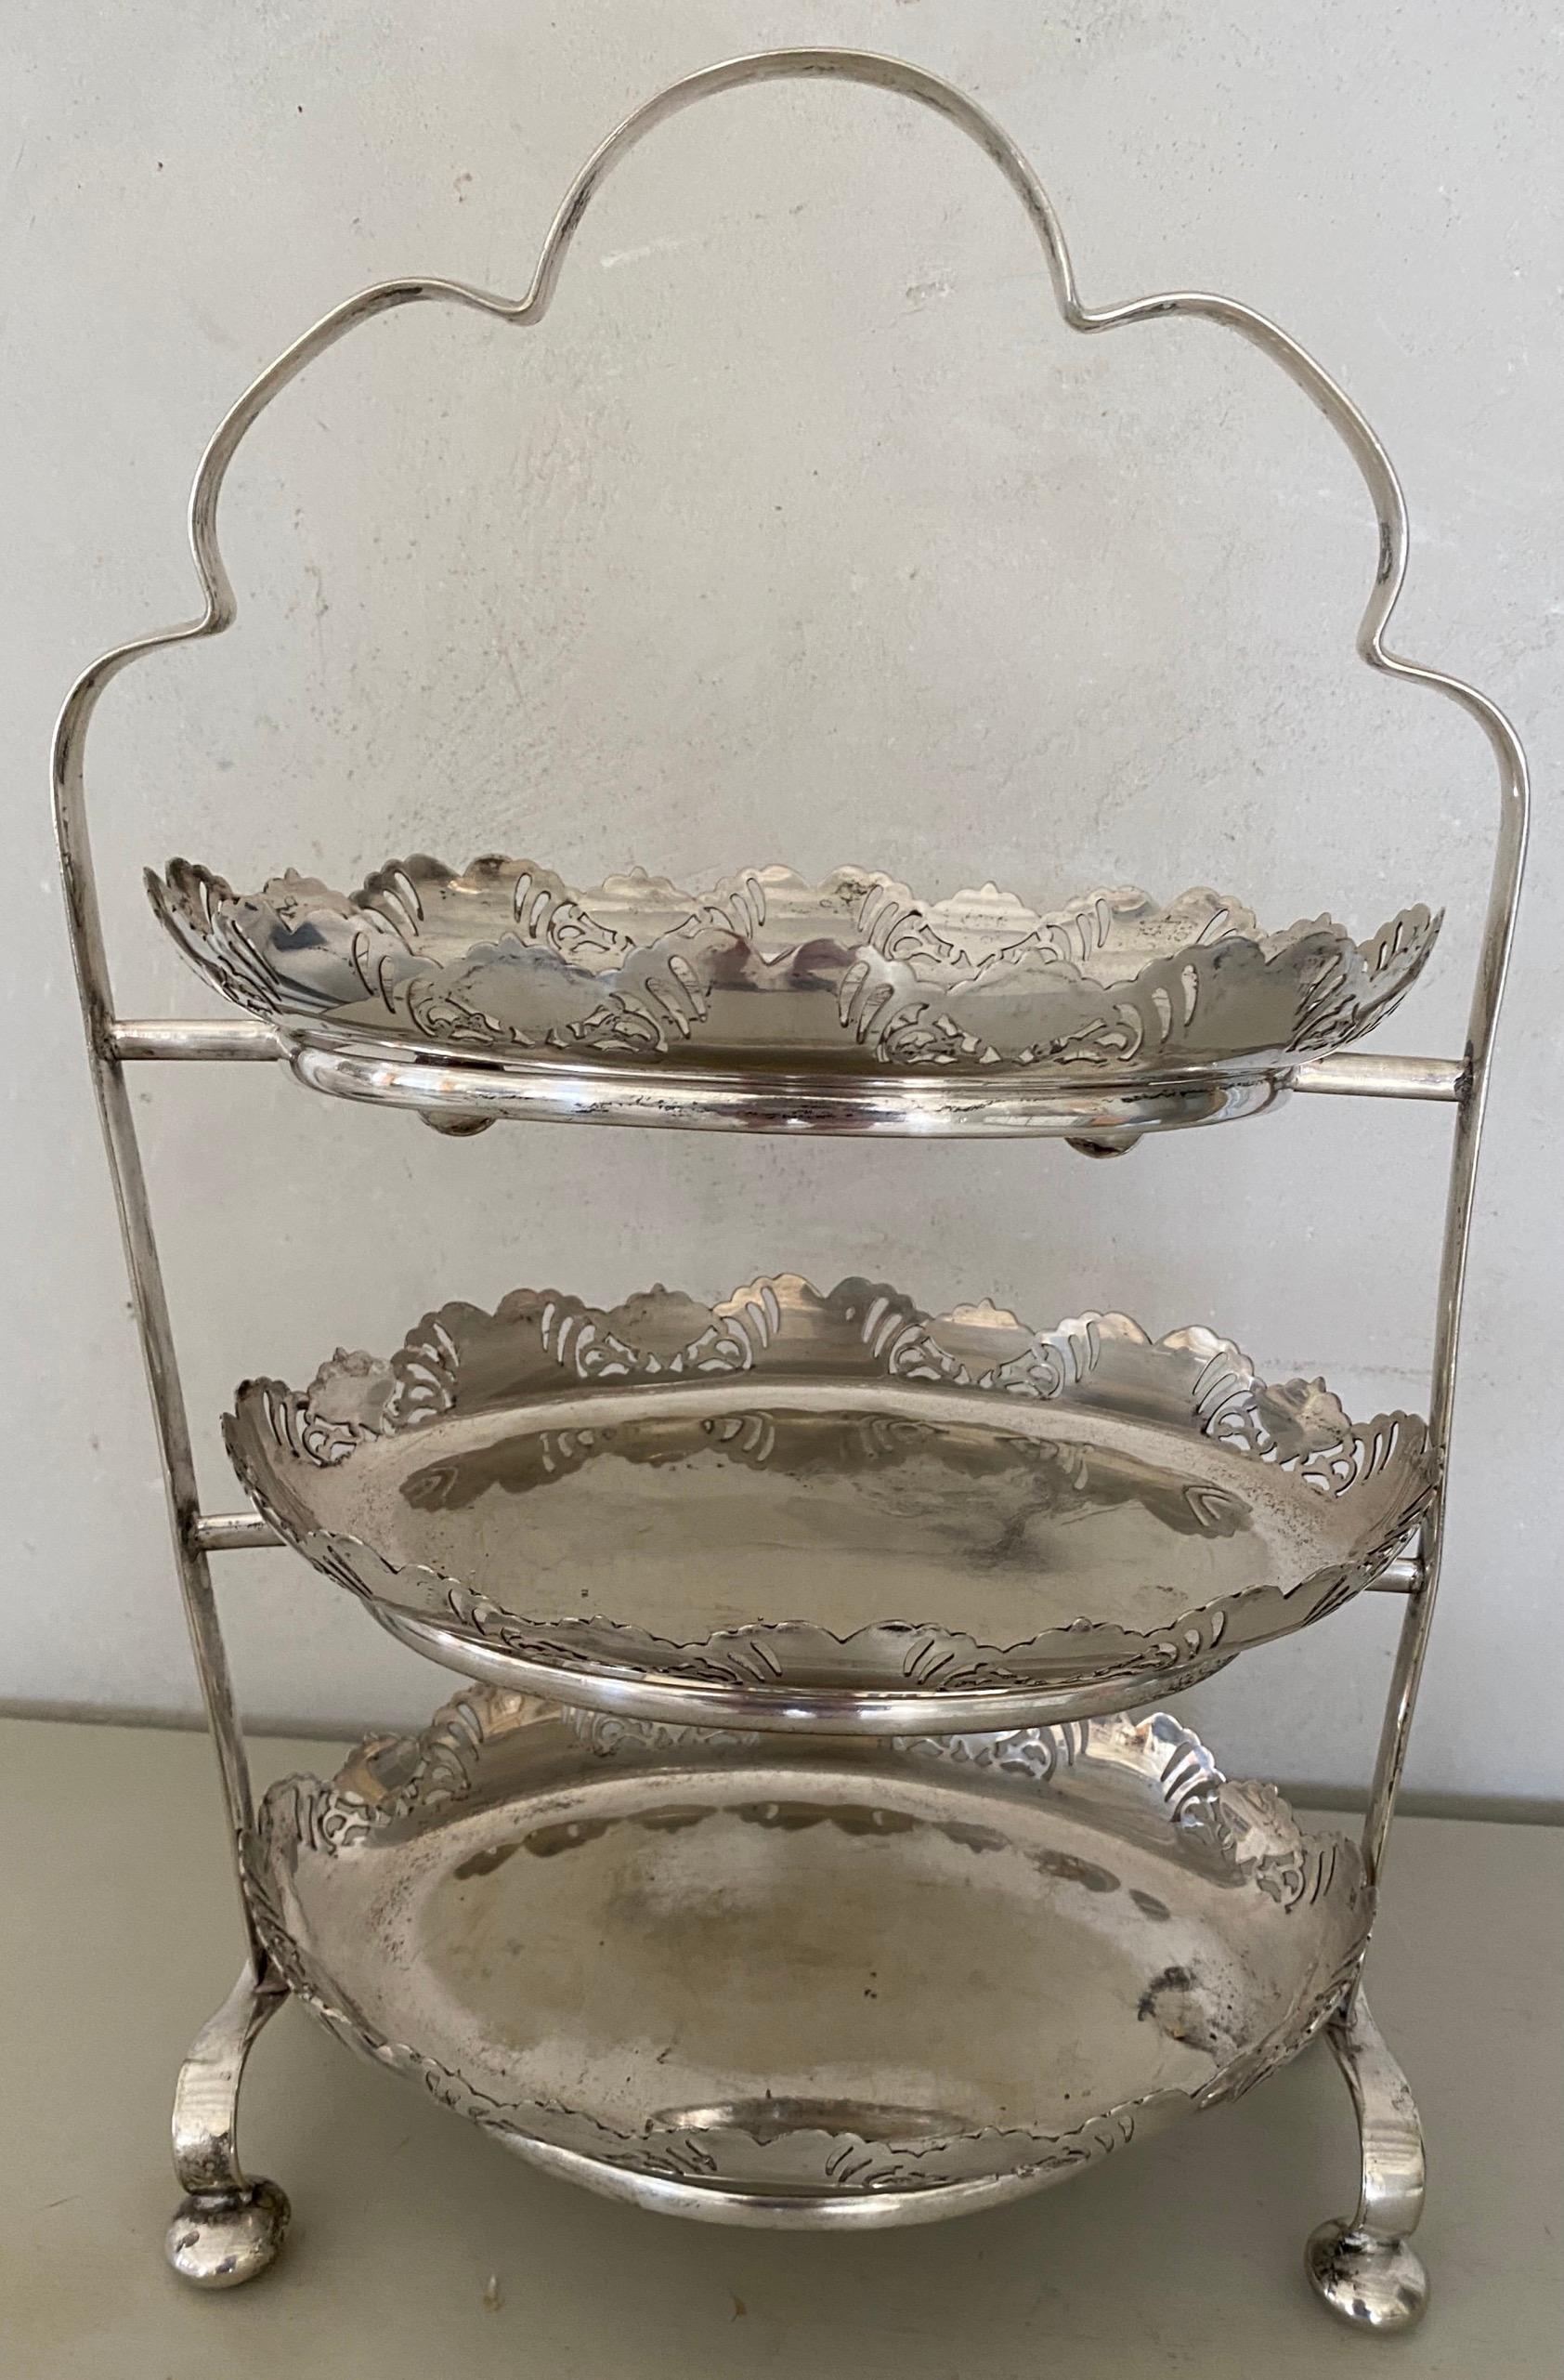 Antique Edwardian English Etagère Cake or Pastry Stand 6